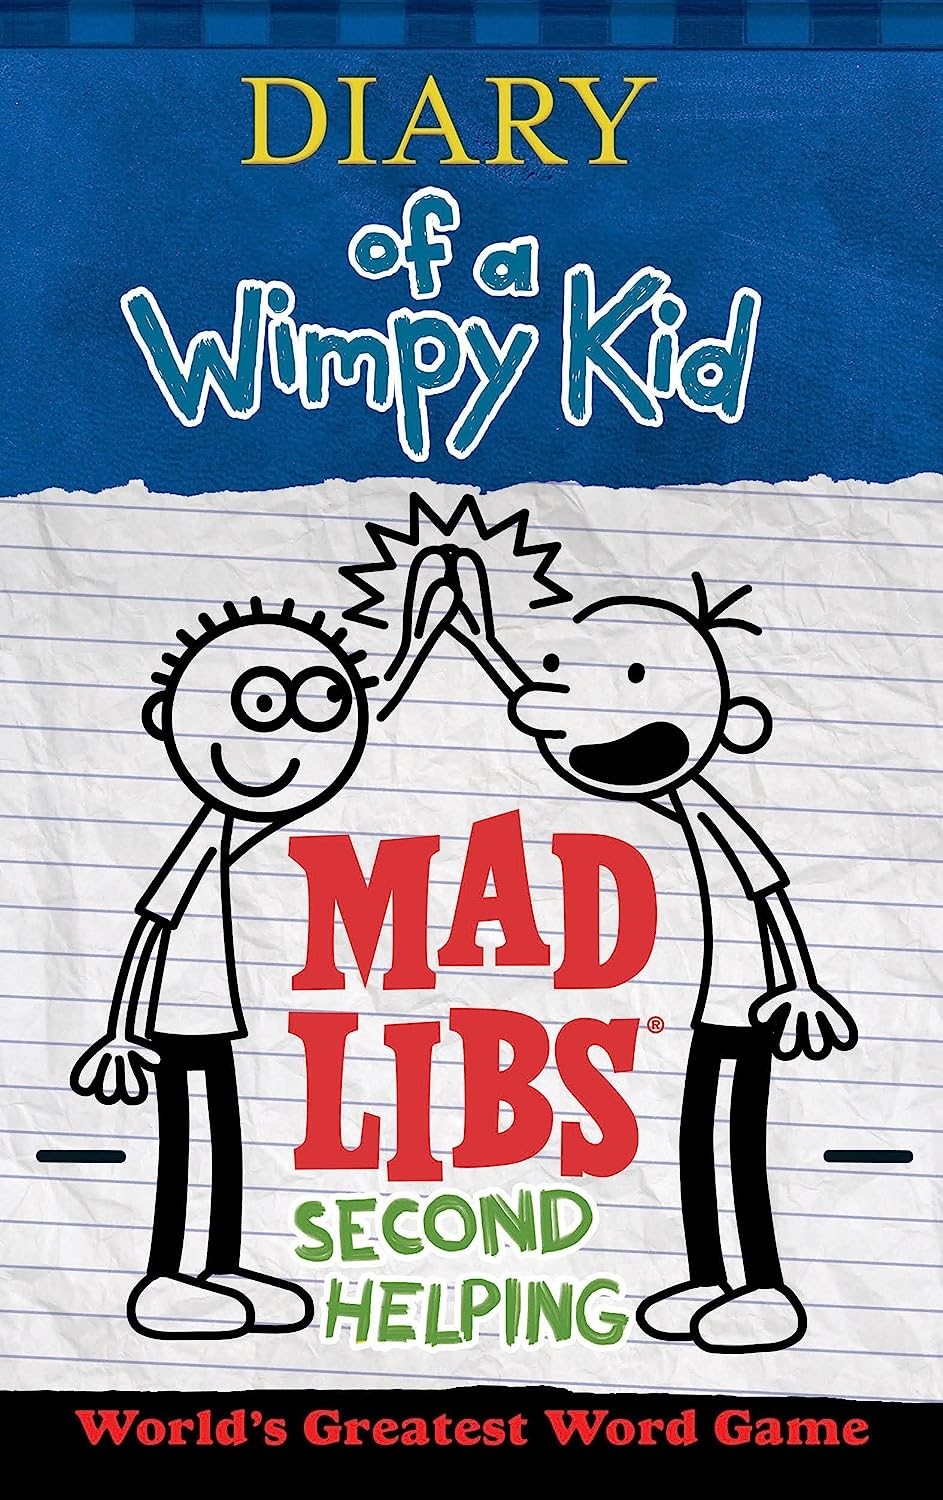 Mad Libs Books Volume 12 Diary of a Wimpy Kid Second Helping 